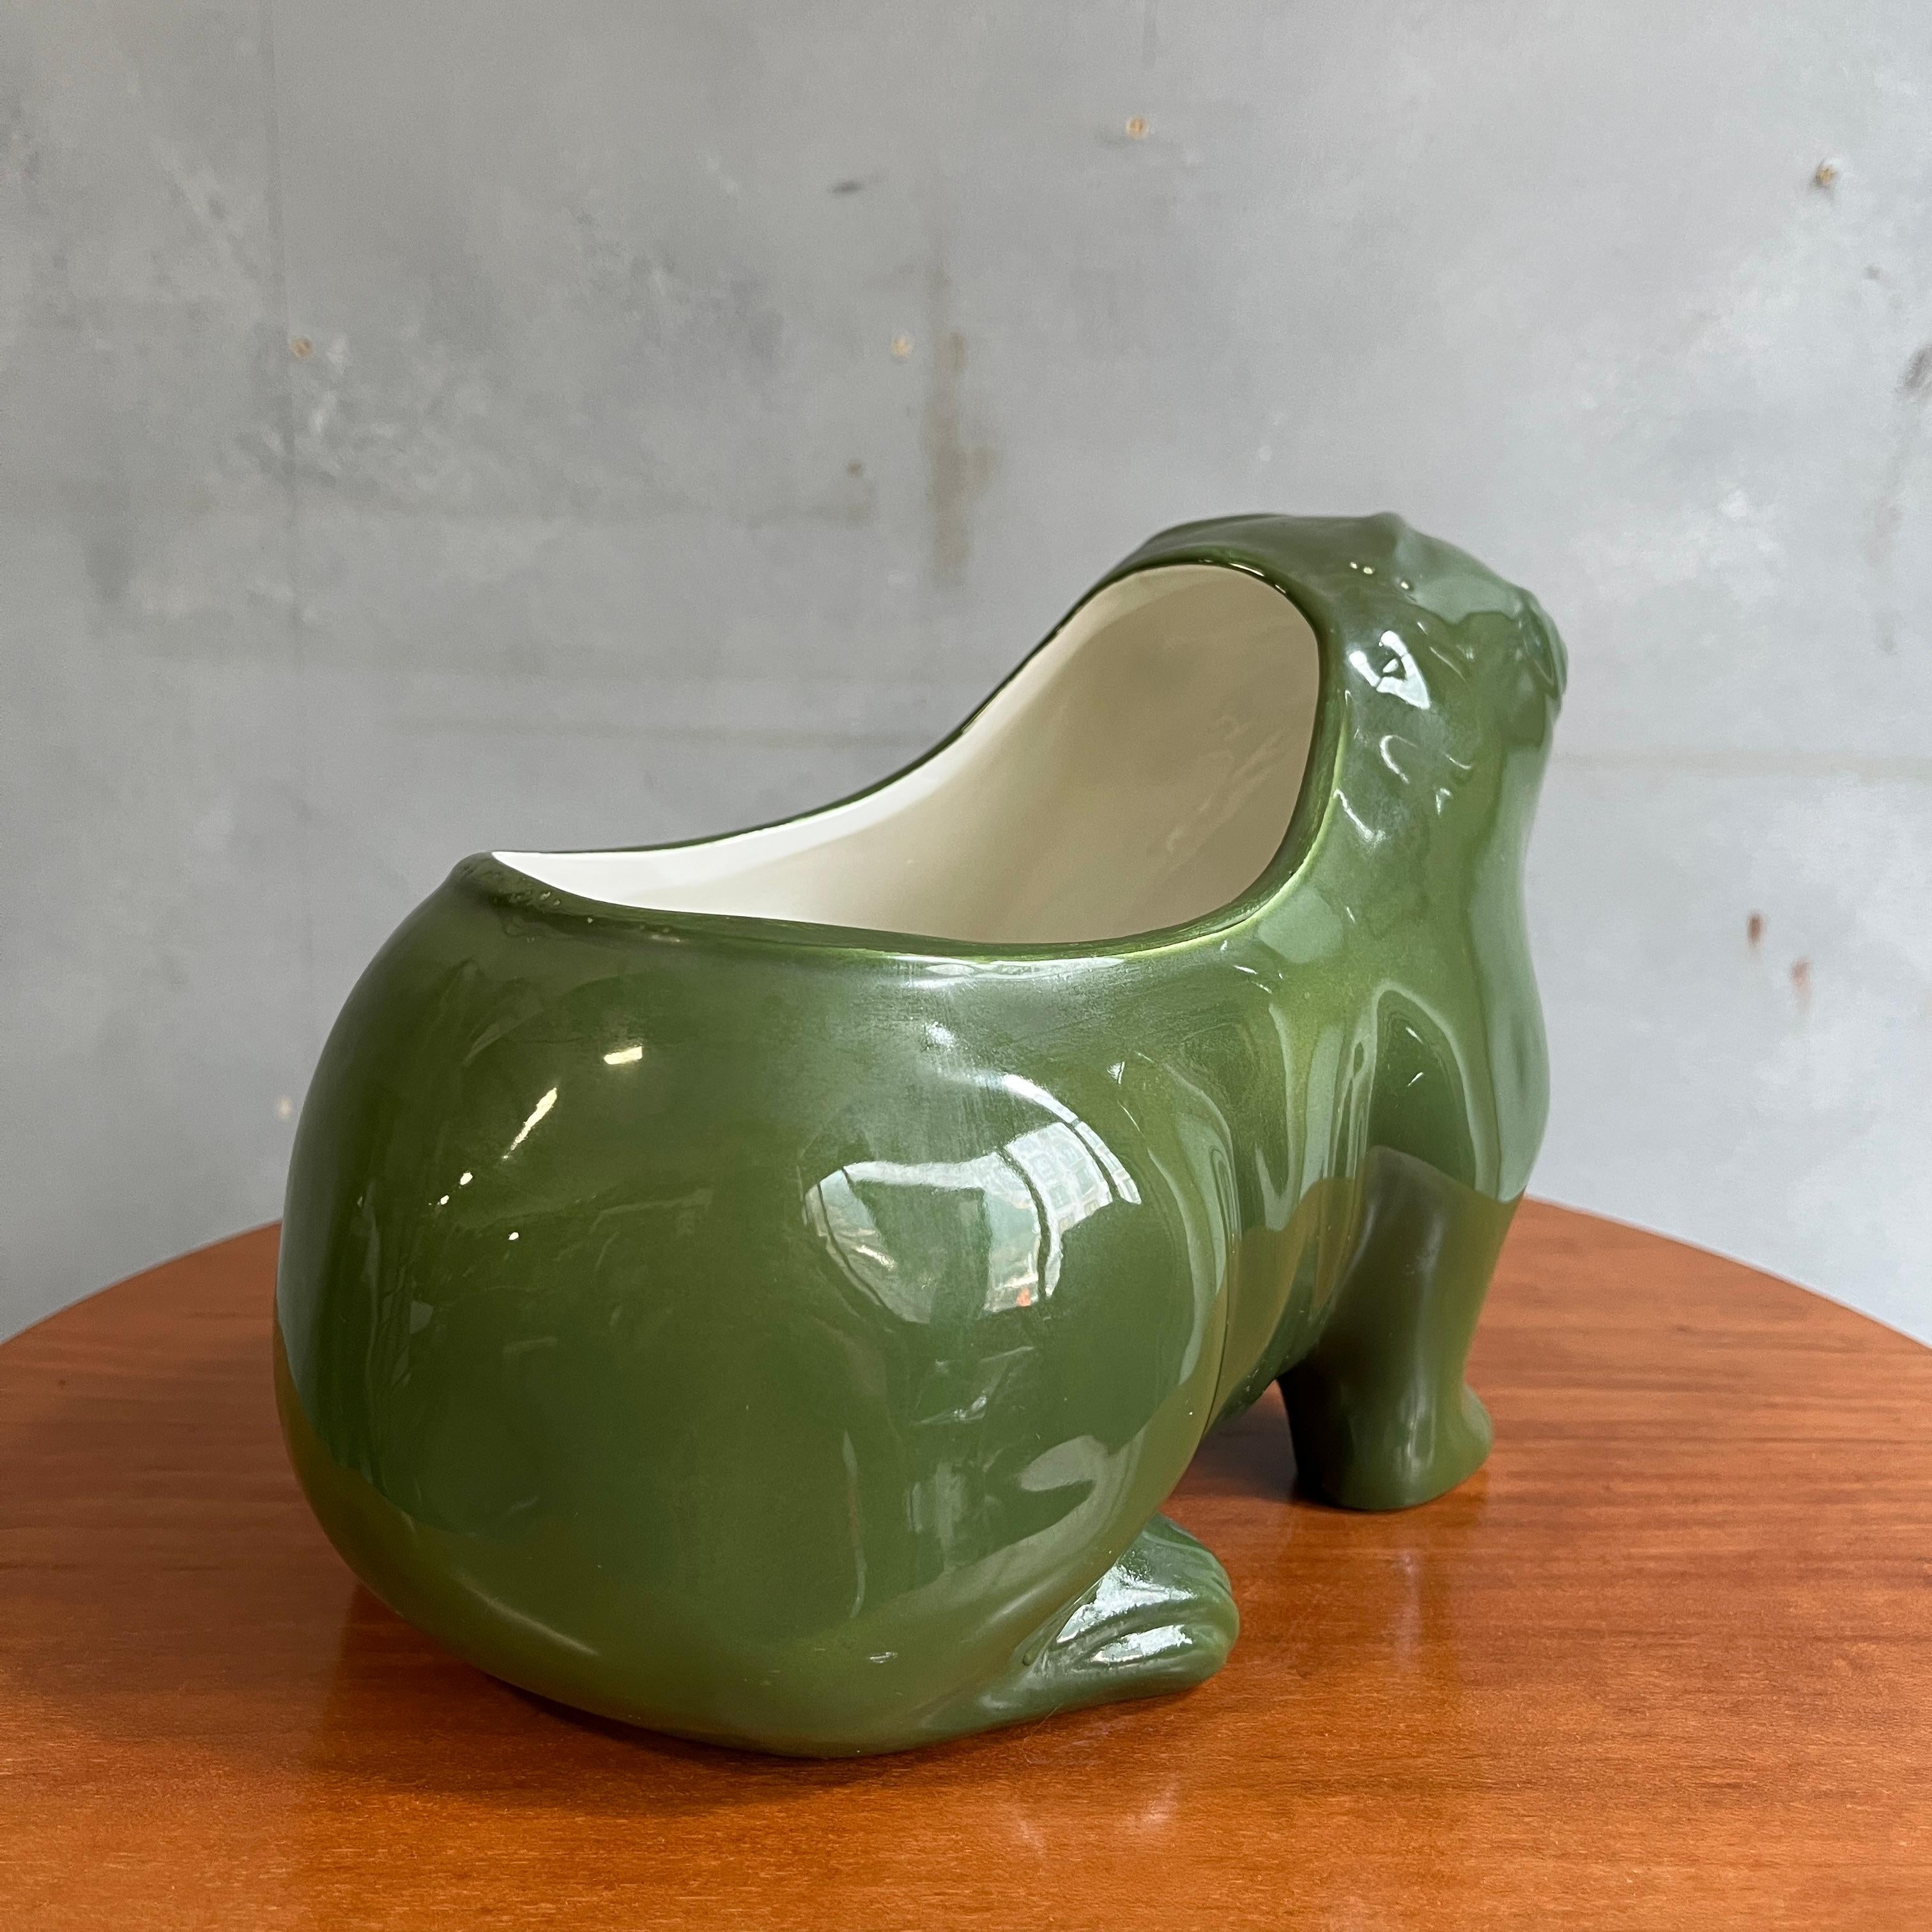 Ceramic Midcentury Green Flower Planter Made in Italy for Tiffany For Sale